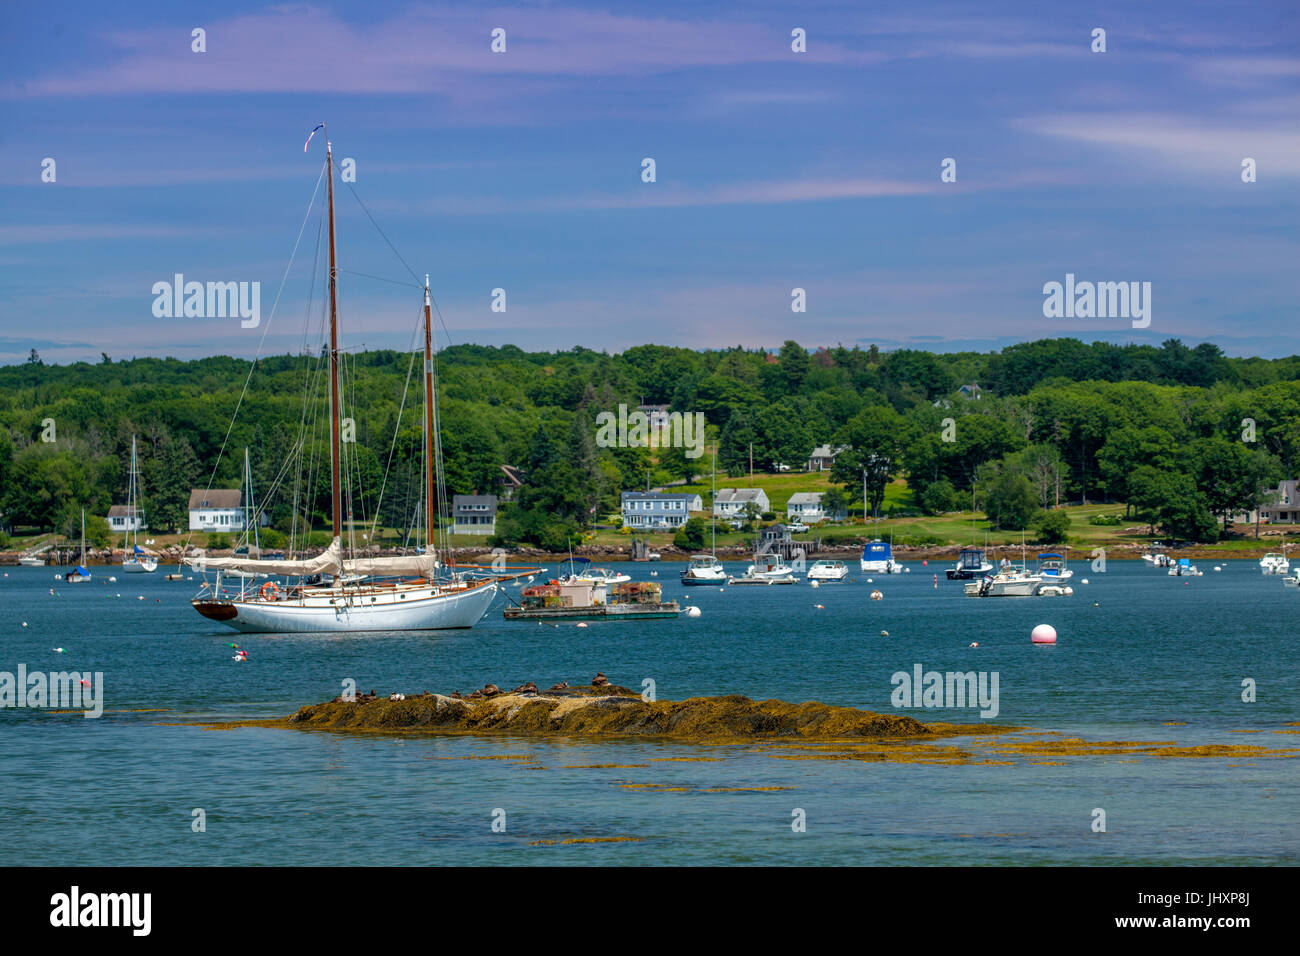 Pemaquid Harbor and recreational boats in Bristol, Maine, USA. Stock Photo